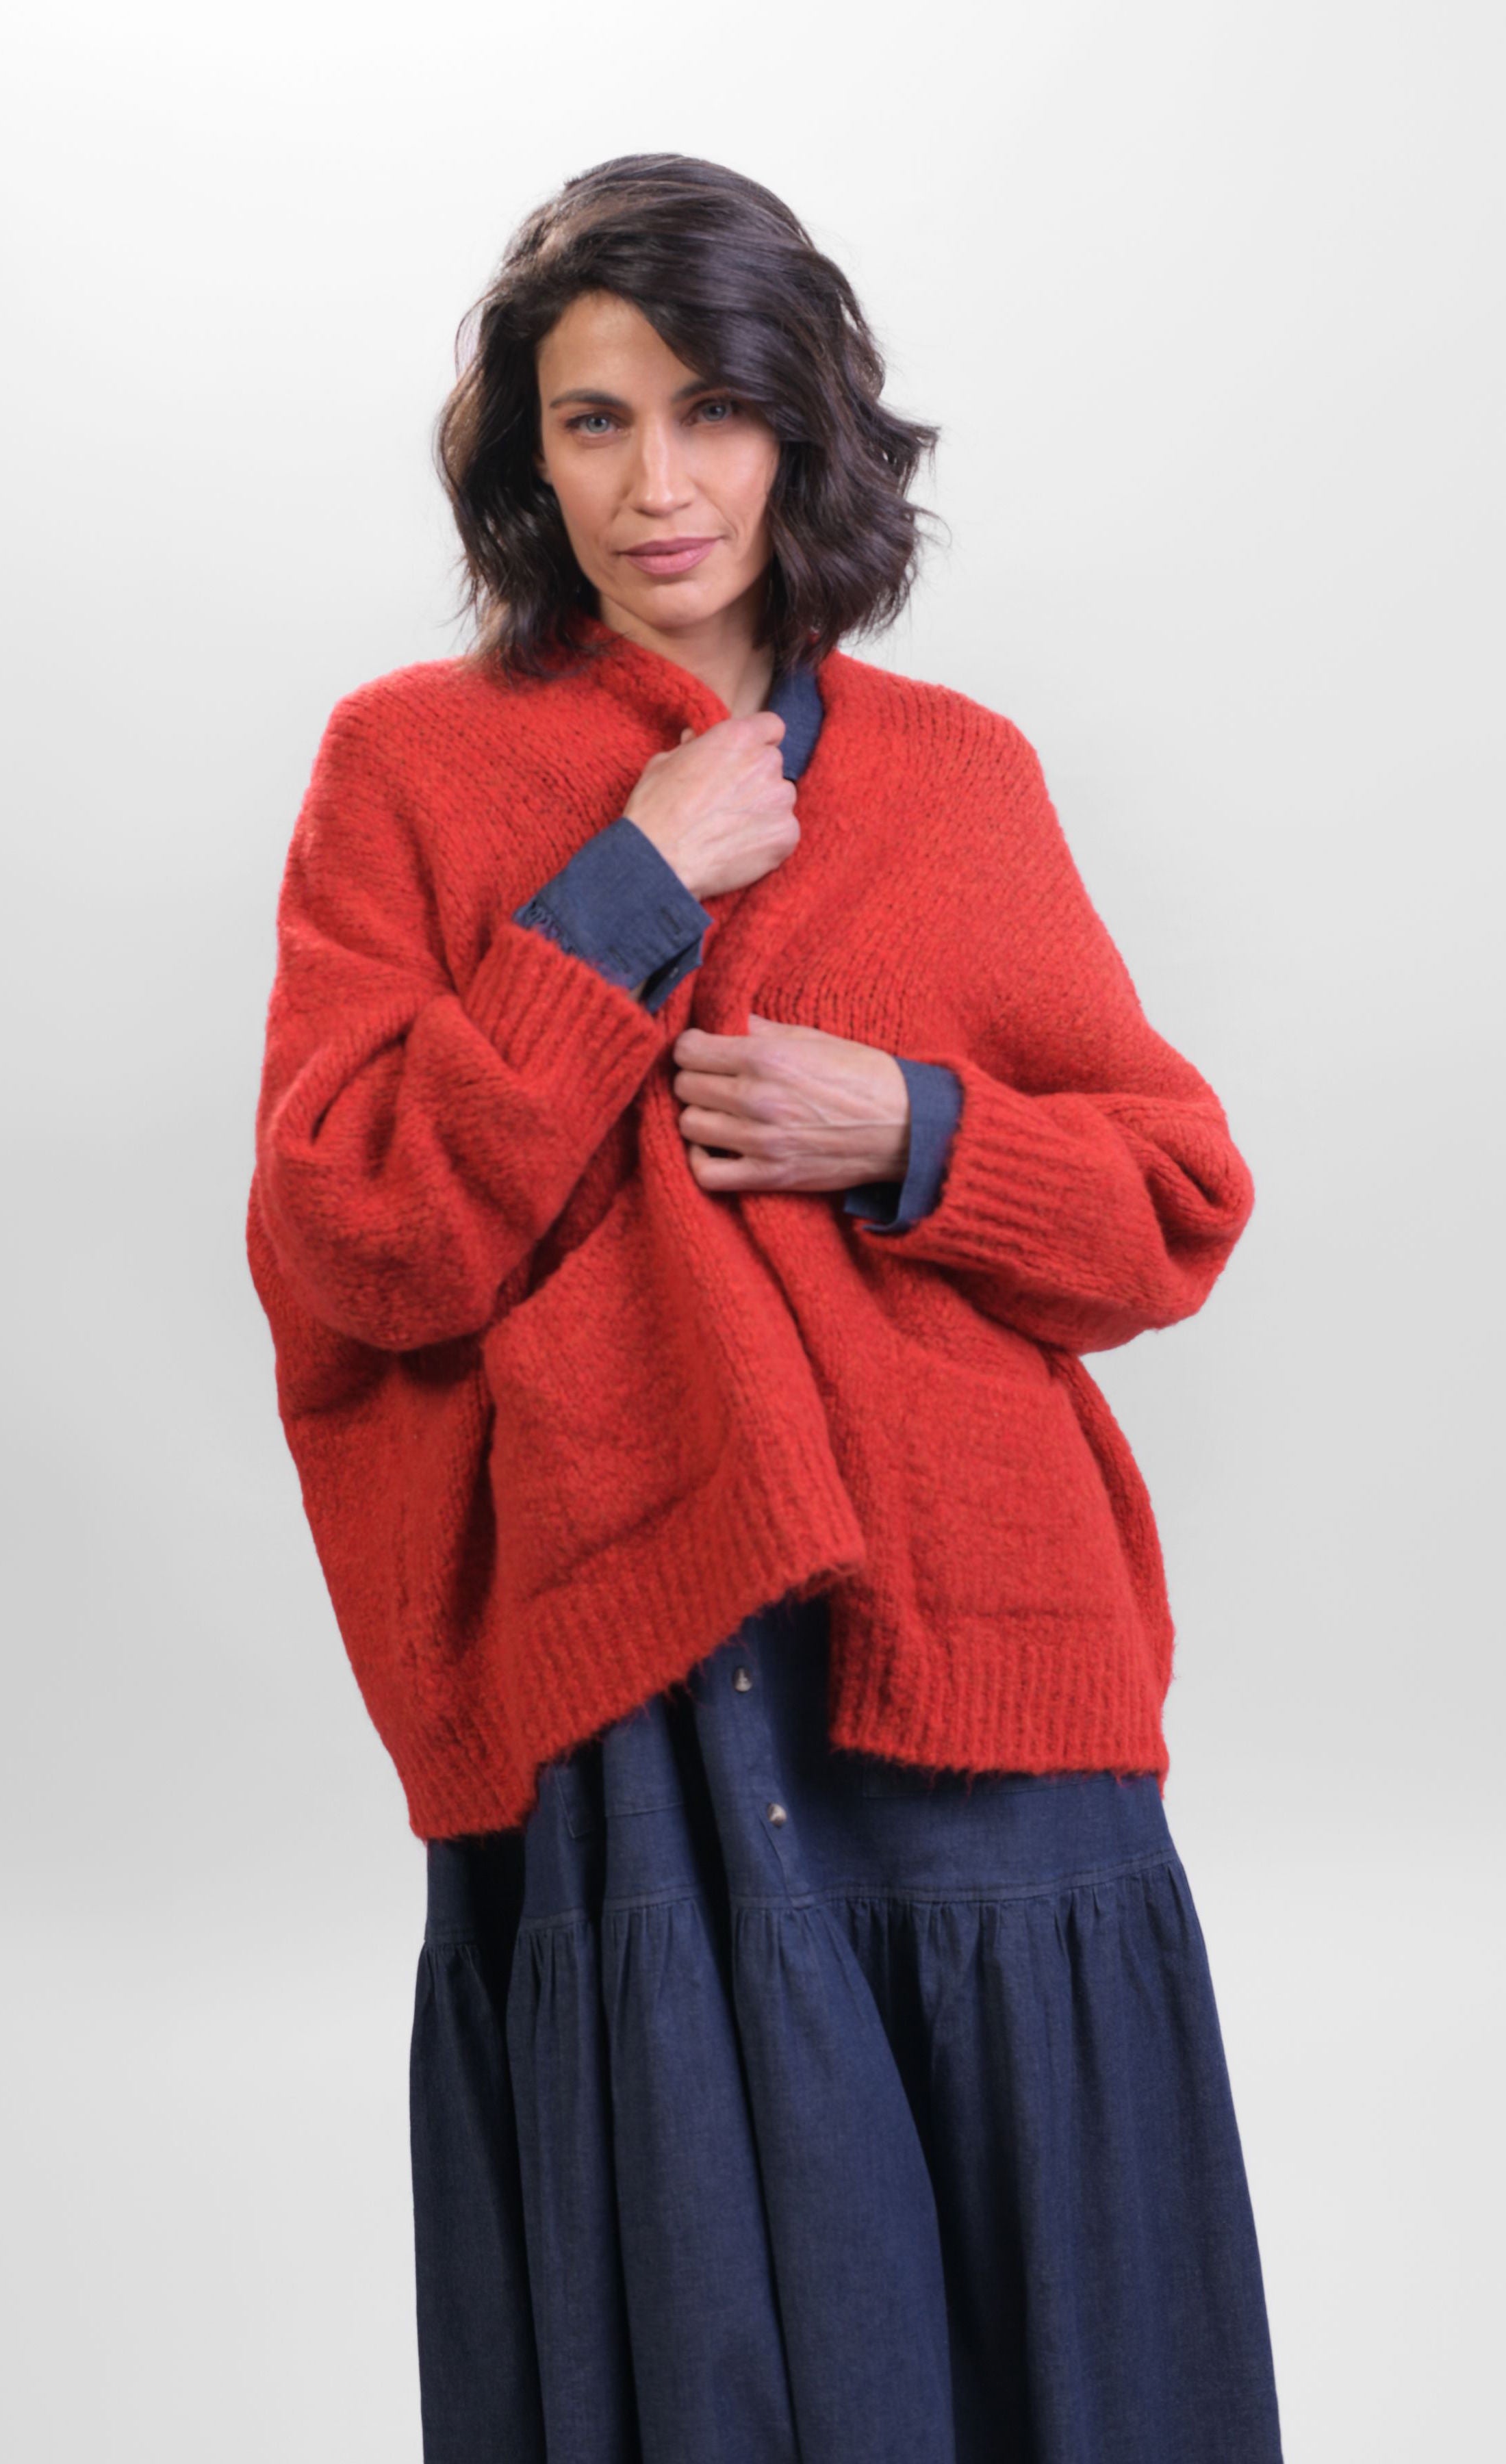 Front top half view of a woman wearing the Alembika Signature Cardigan. This cardigan is red/flame colored. It has long sleeves, a 3-button front, and two front pockets.